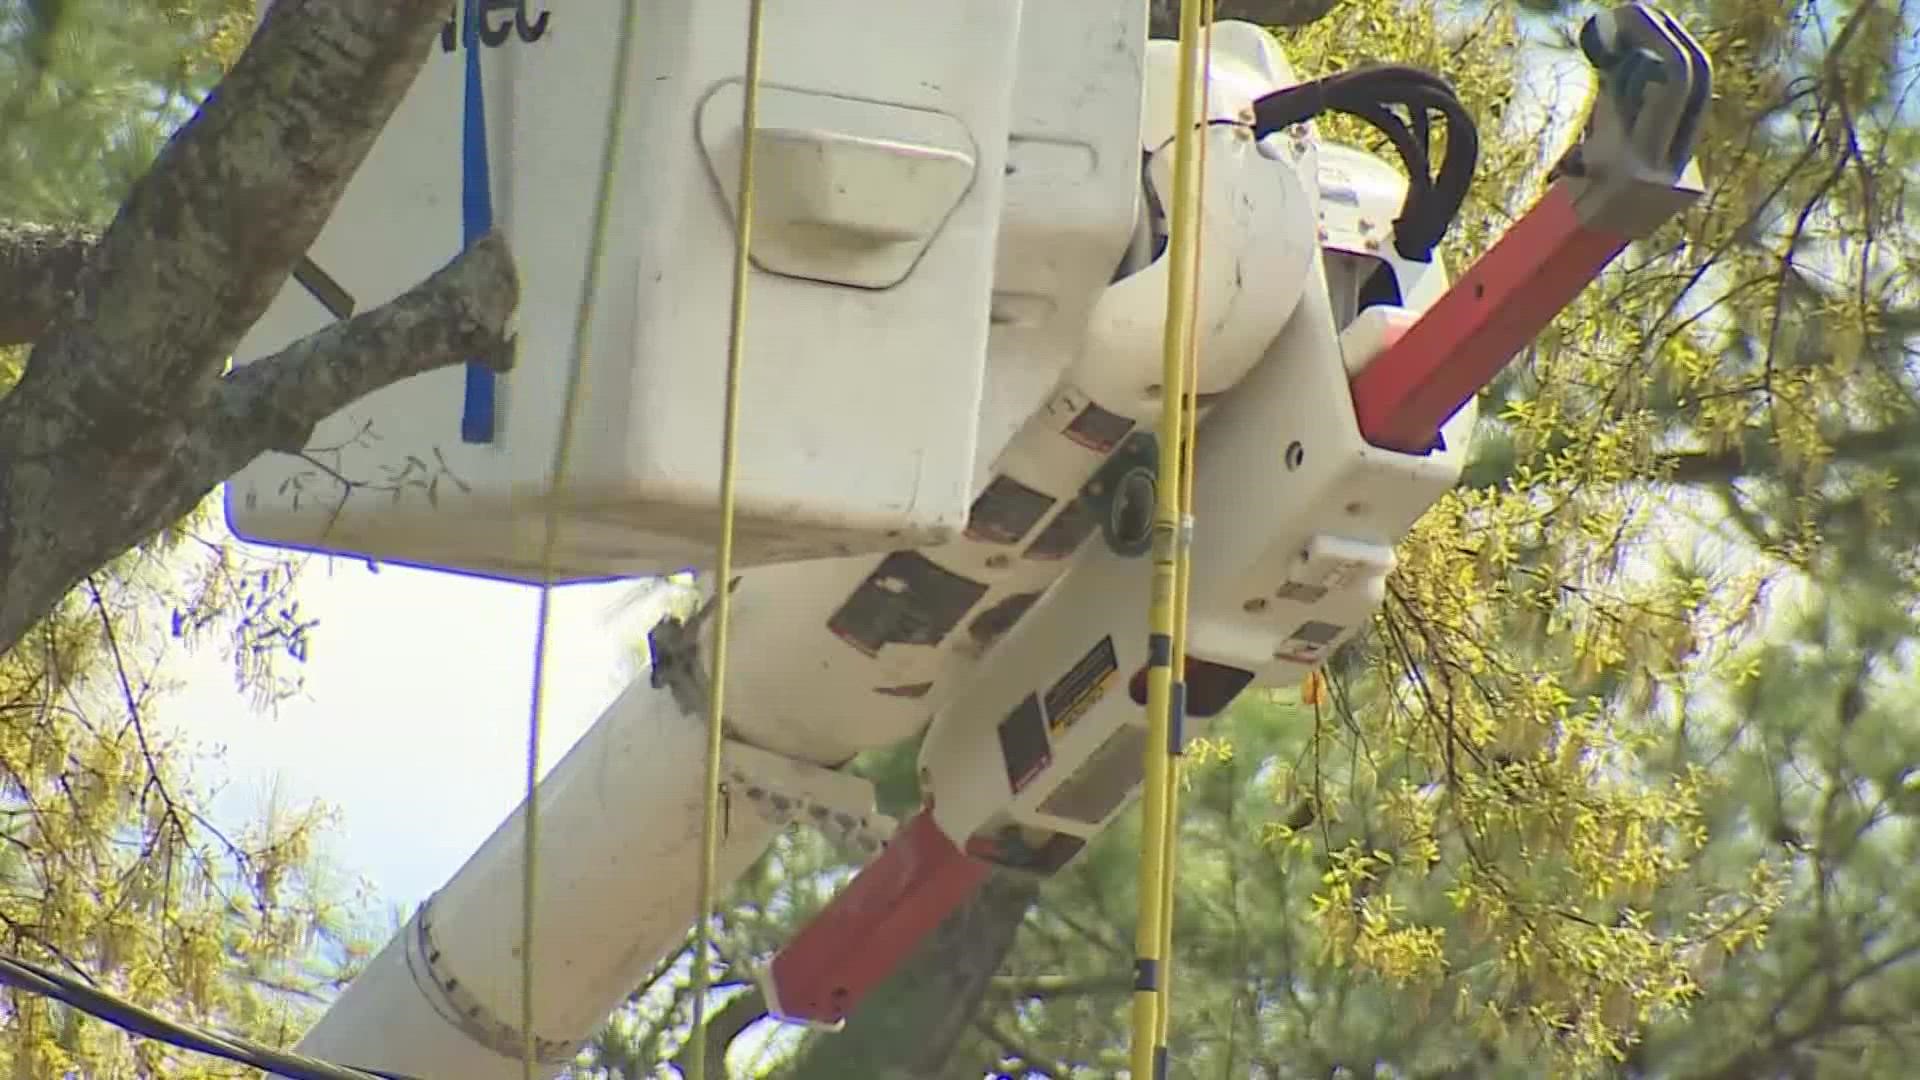 A tree trimmer died Monday after being electrocuted while working in northwest Harris County.